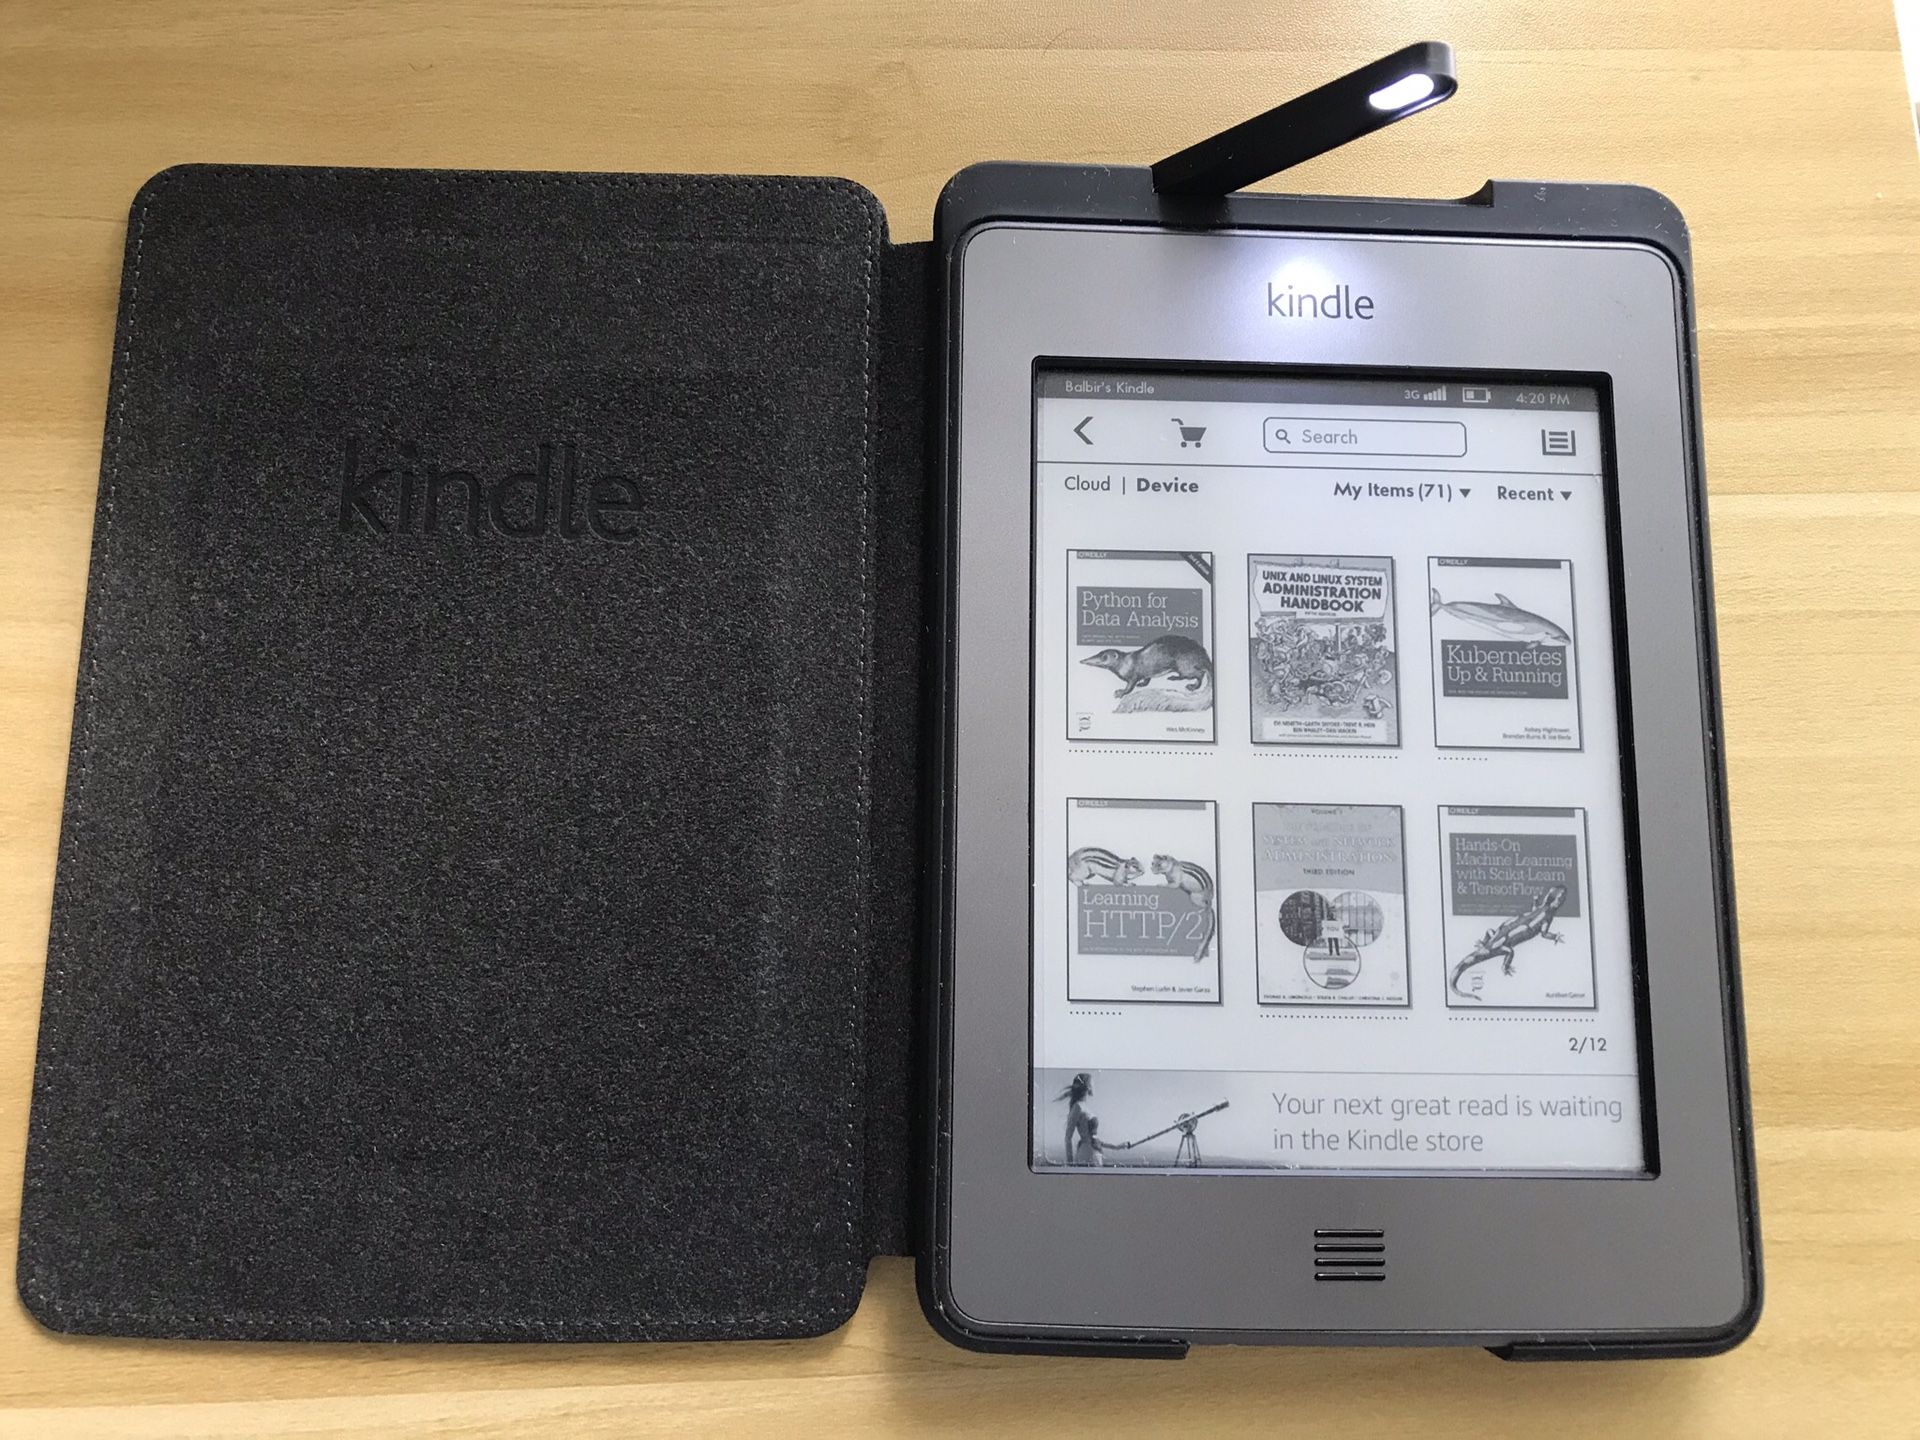 Kindle touch 3G